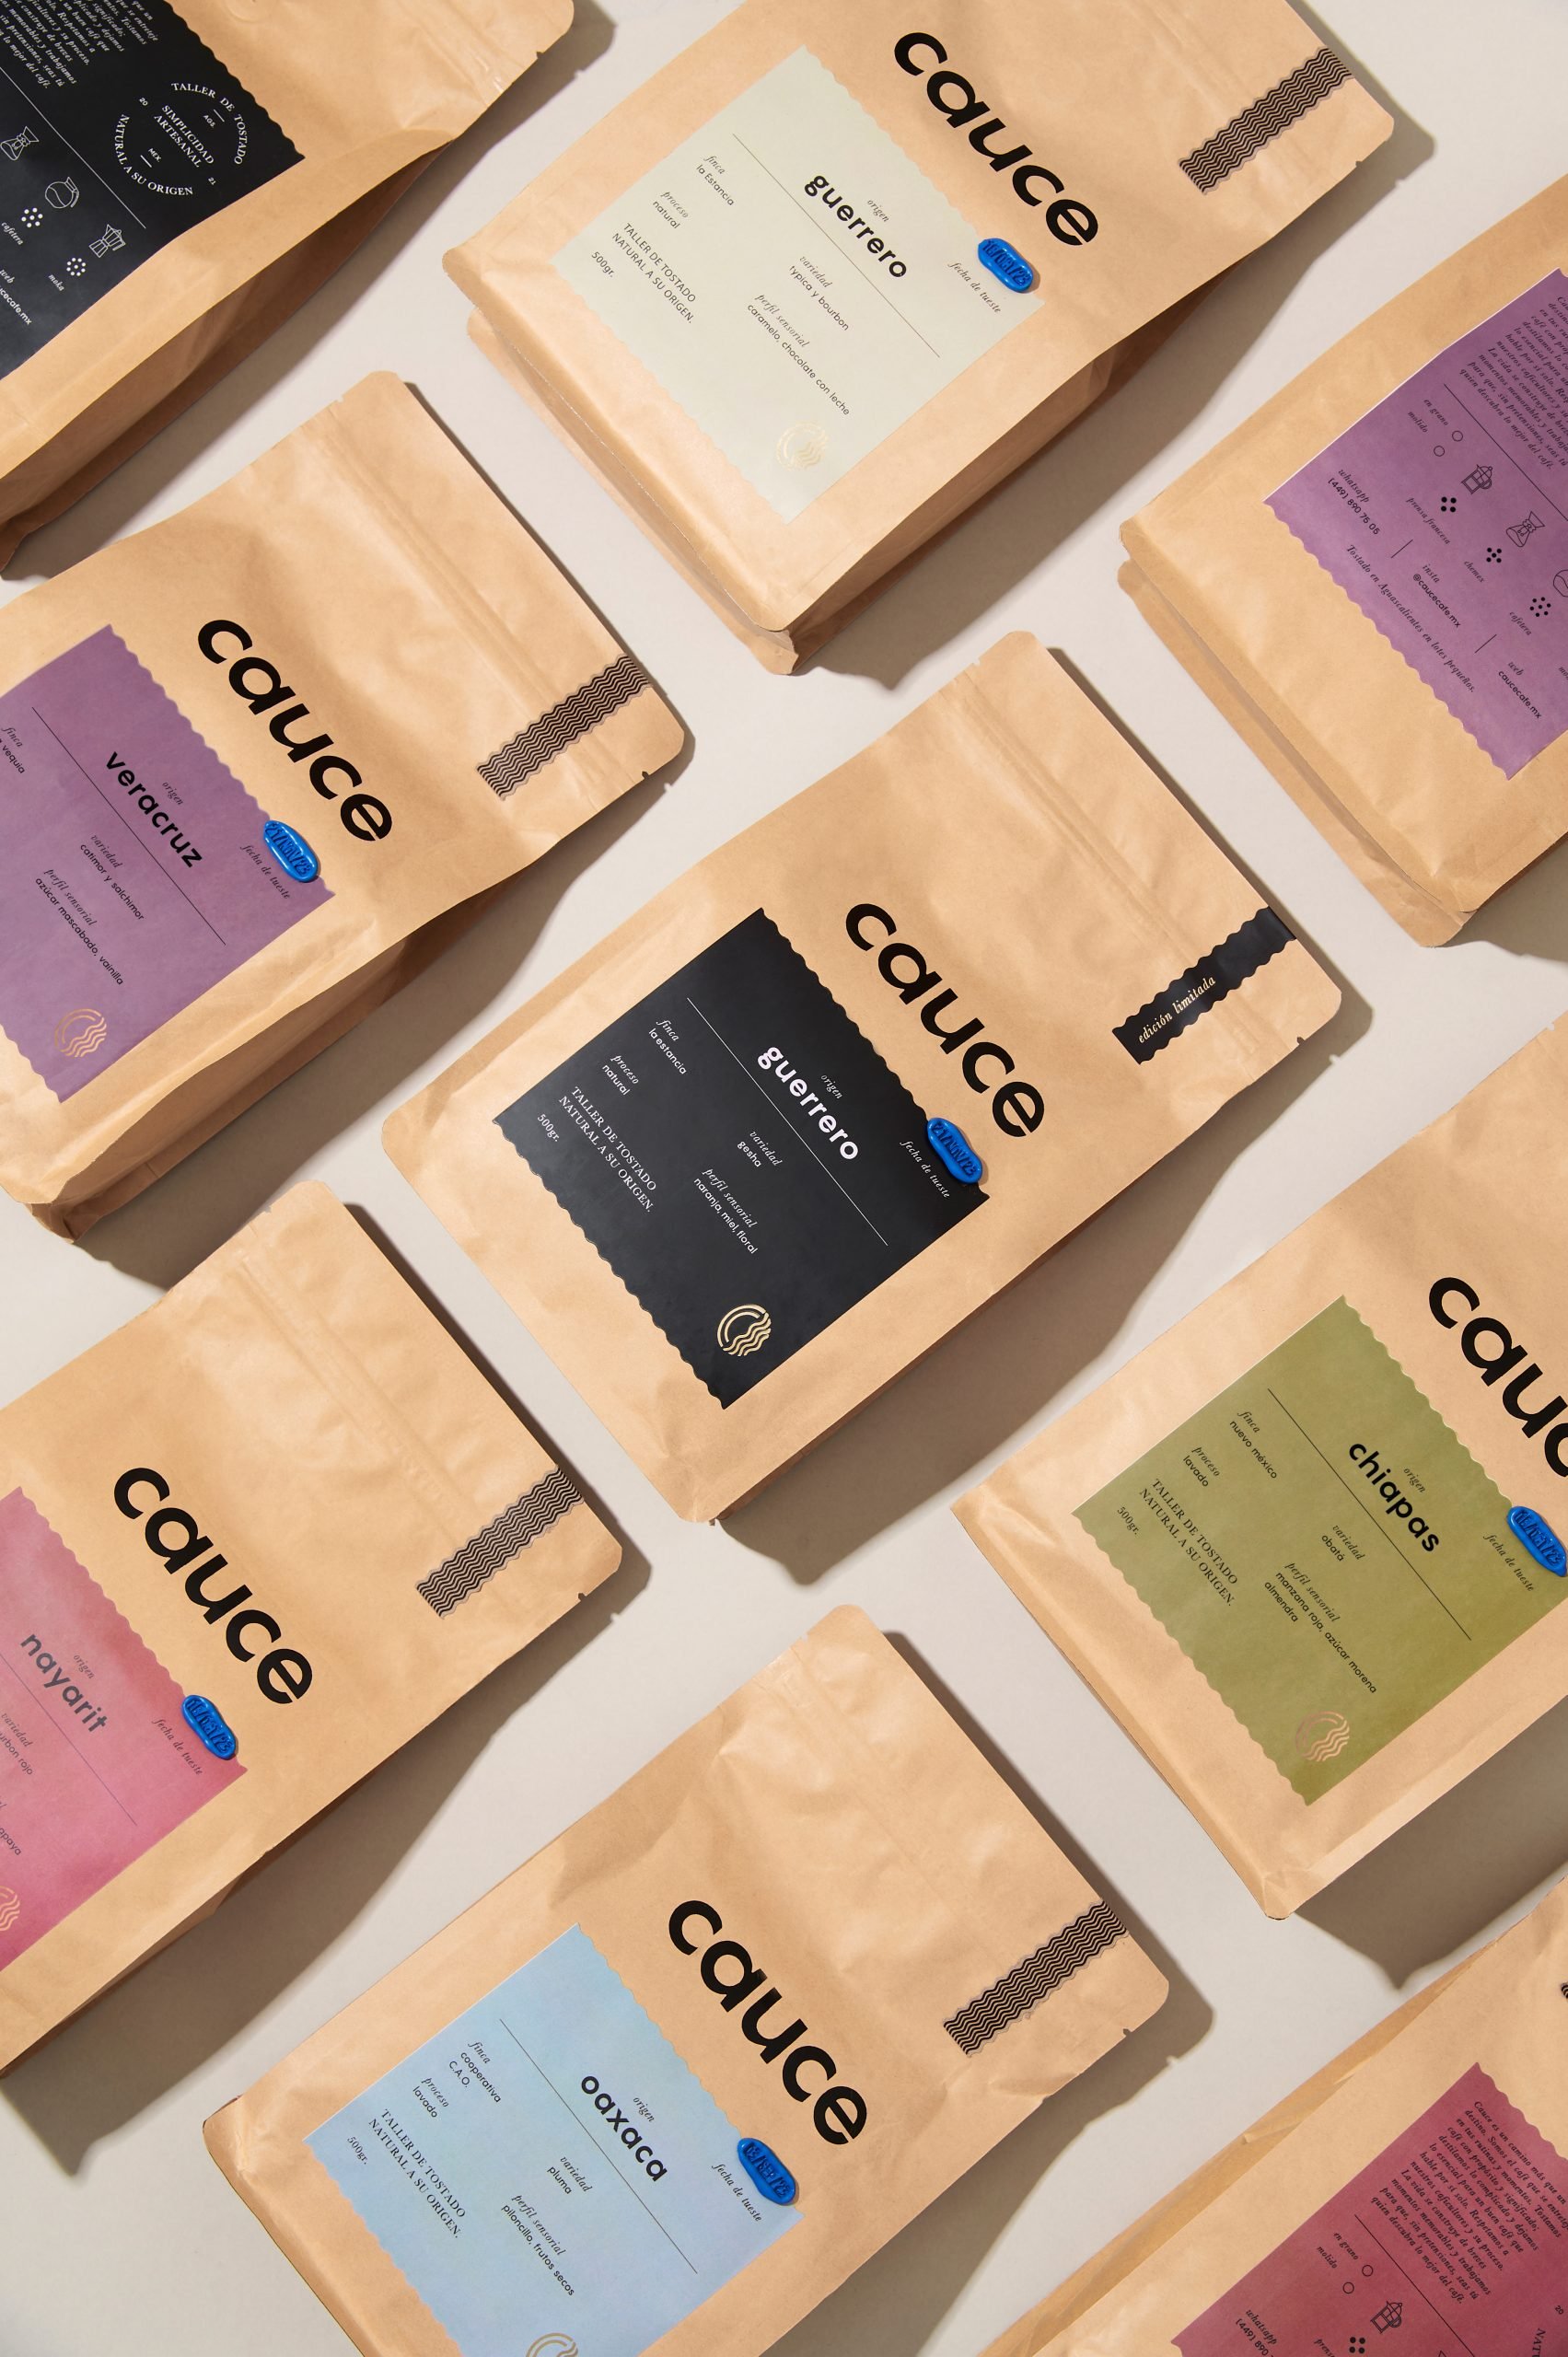 The Fun is in the Little Details of cauce’s Classy, Understated Coffee Packaging